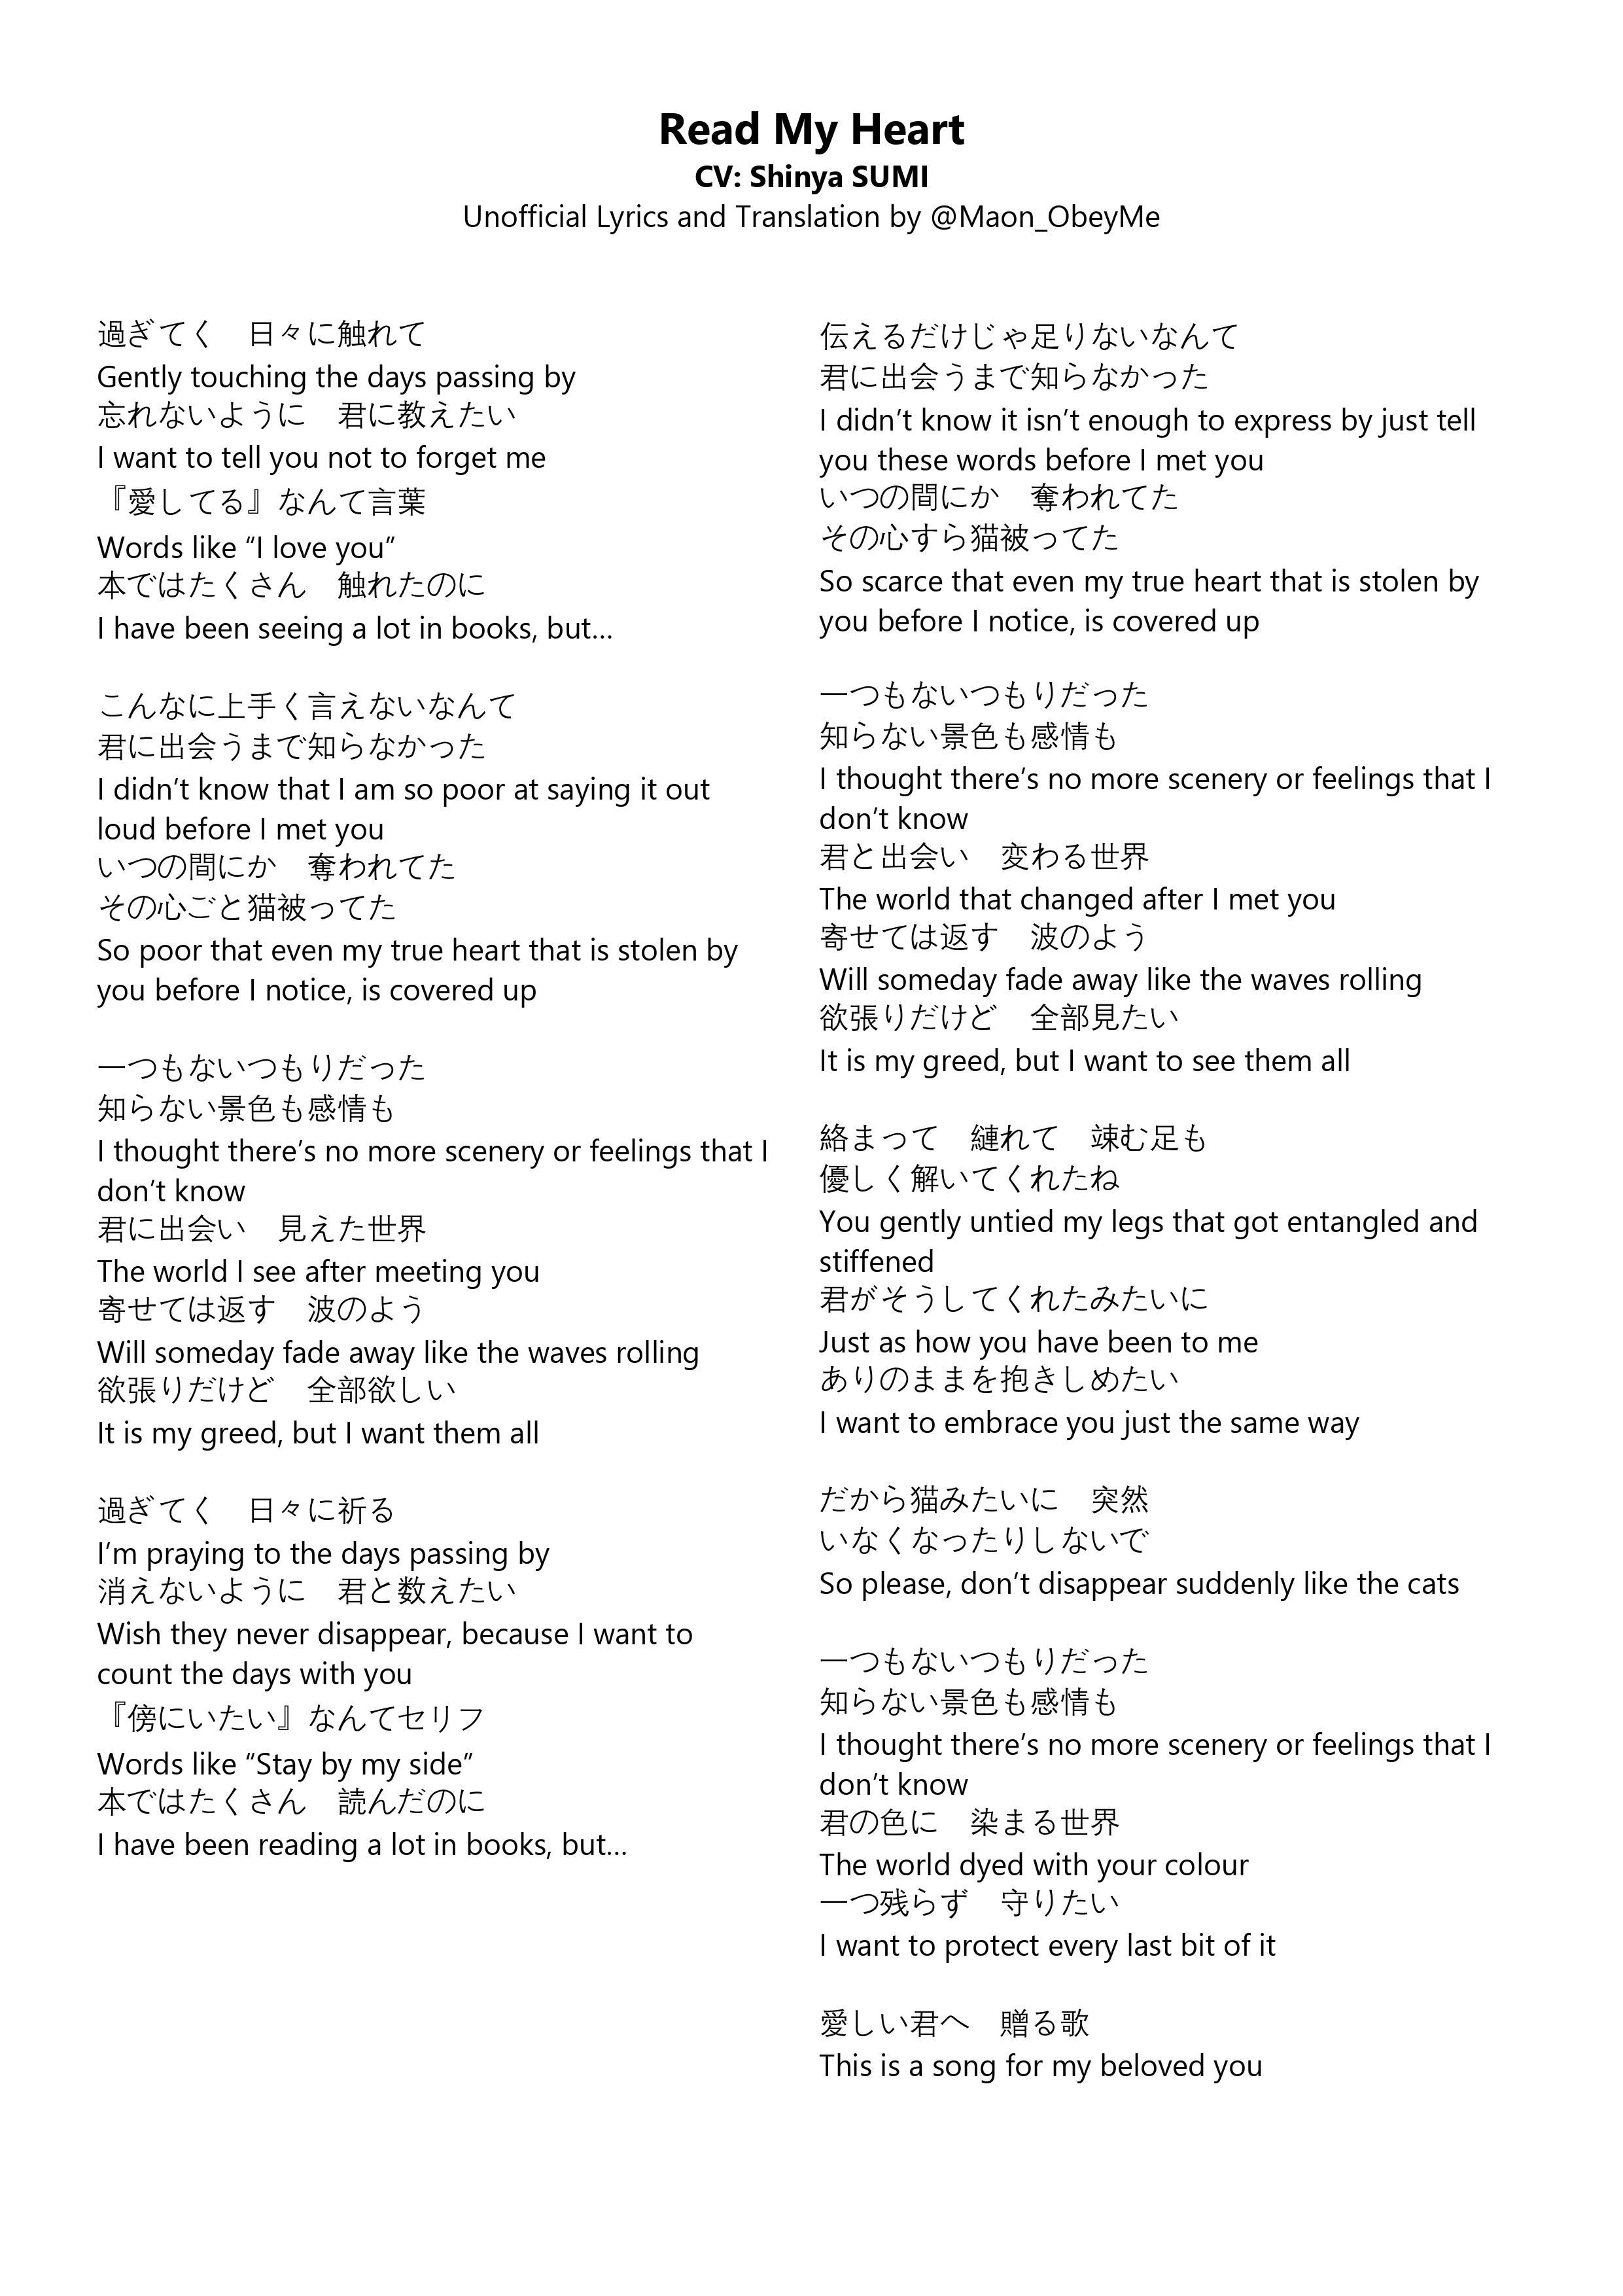 Unofficial Lyrics Translation For Obey Me Songs Twitter